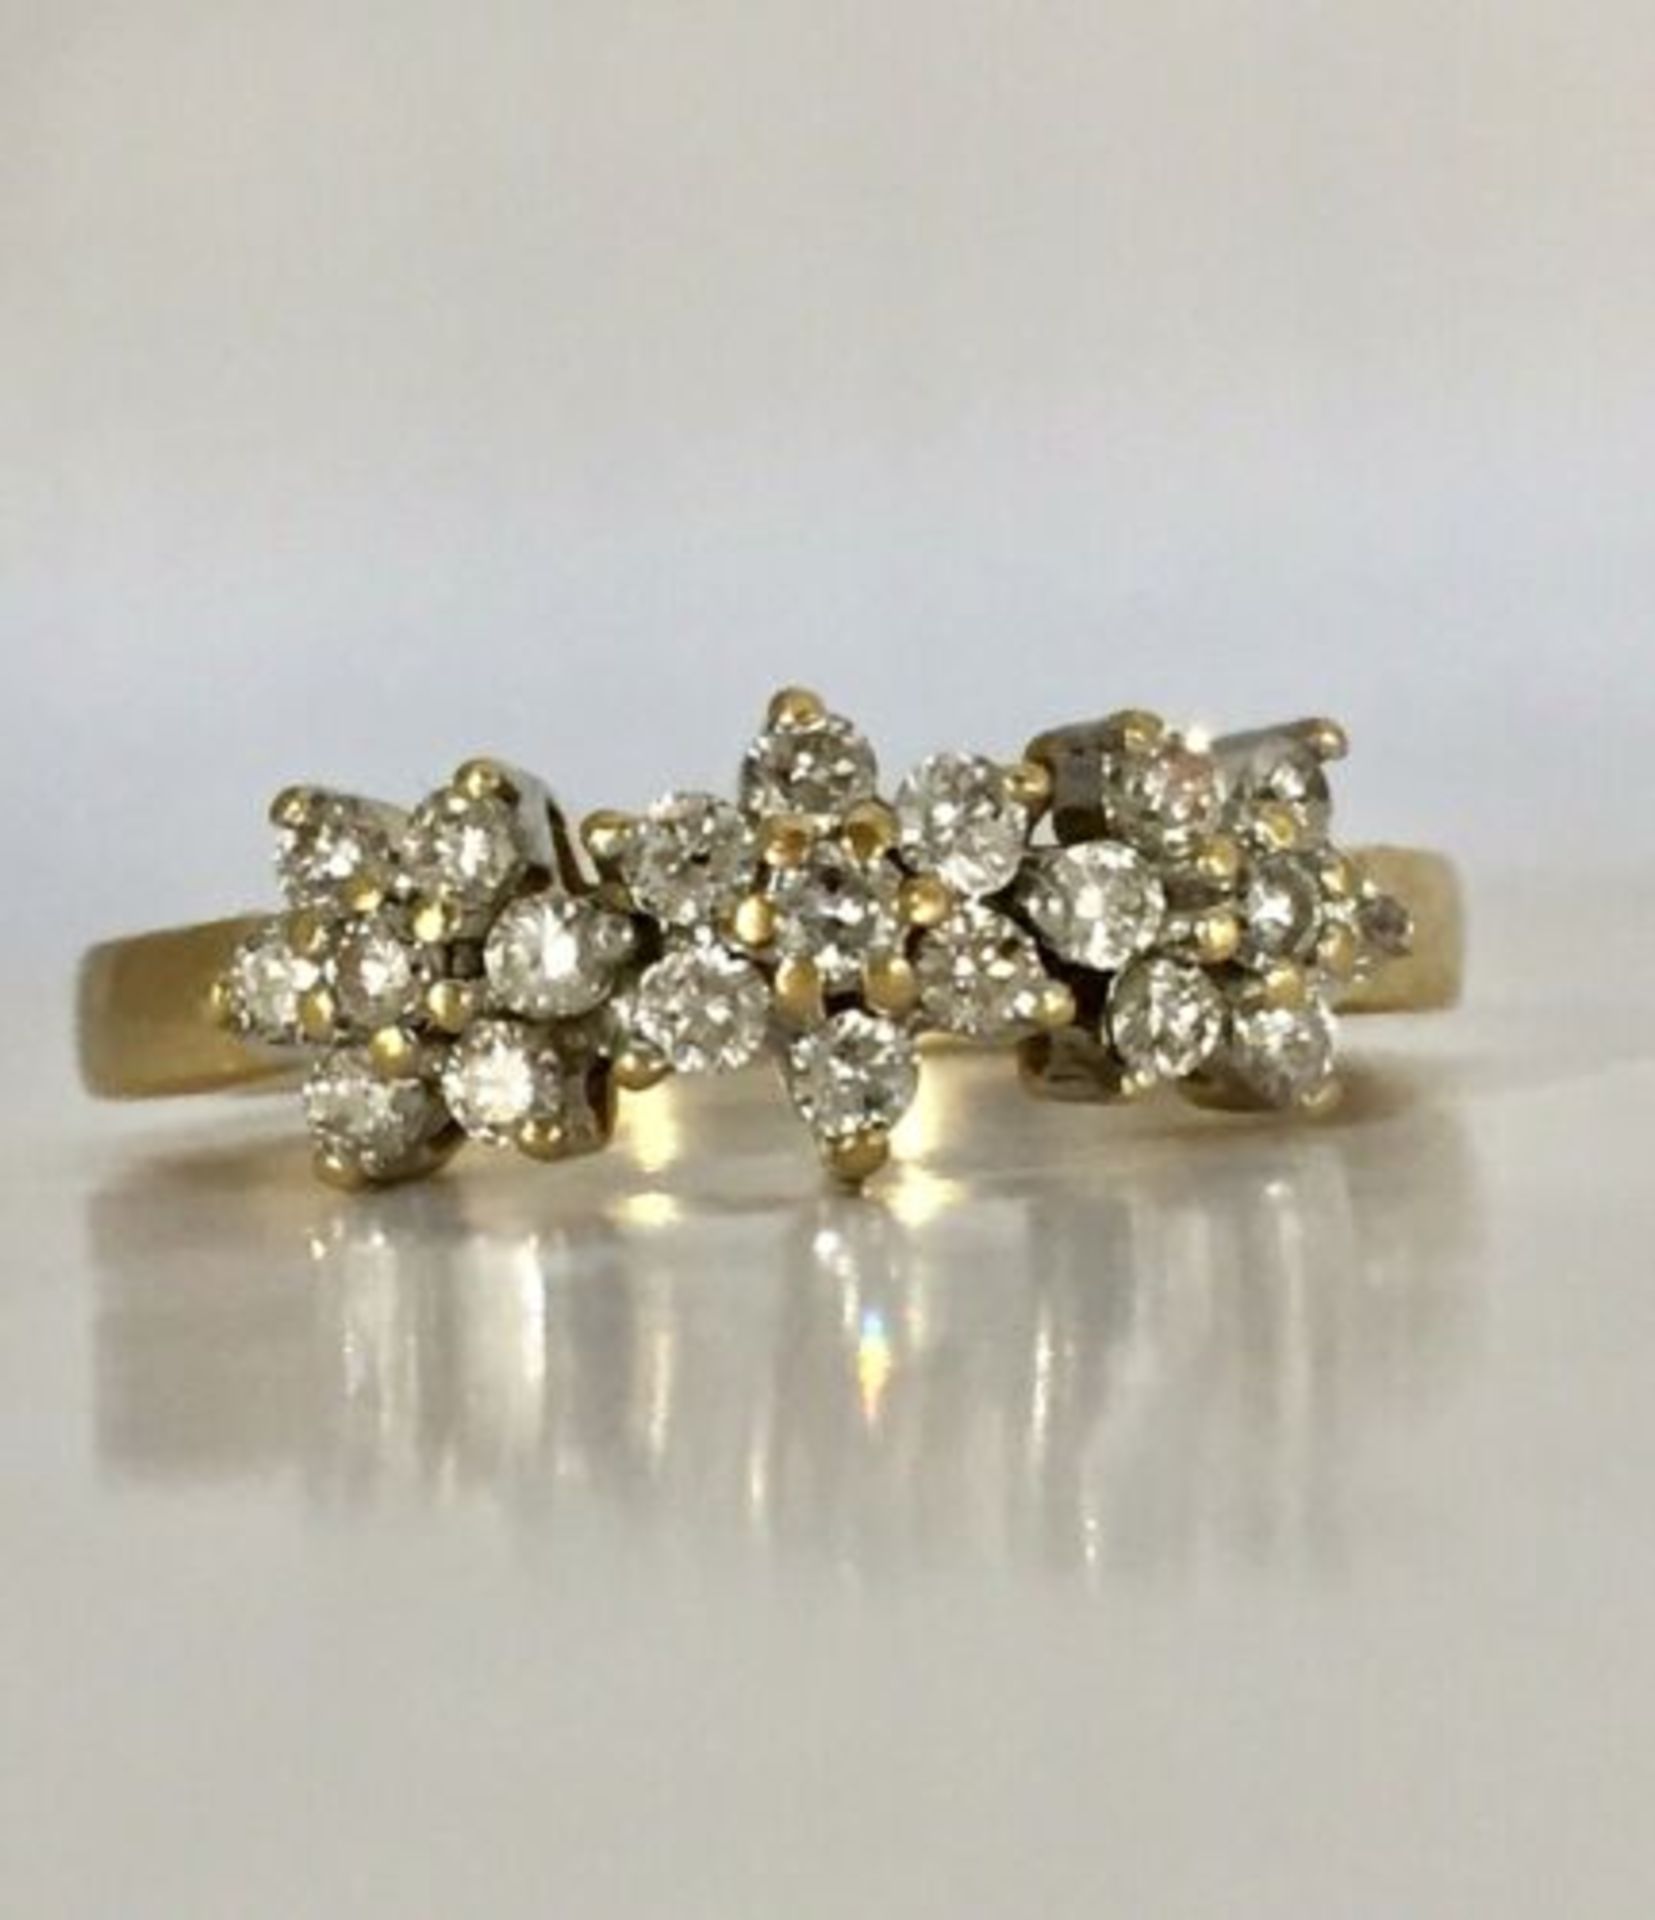 CLUSTER DIAMOND DRESS/ENGAGEMENT RING 18CT YELLOW GOLD + GIFT BOX + VALUATION CERT OF £995 - Image 2 of 4